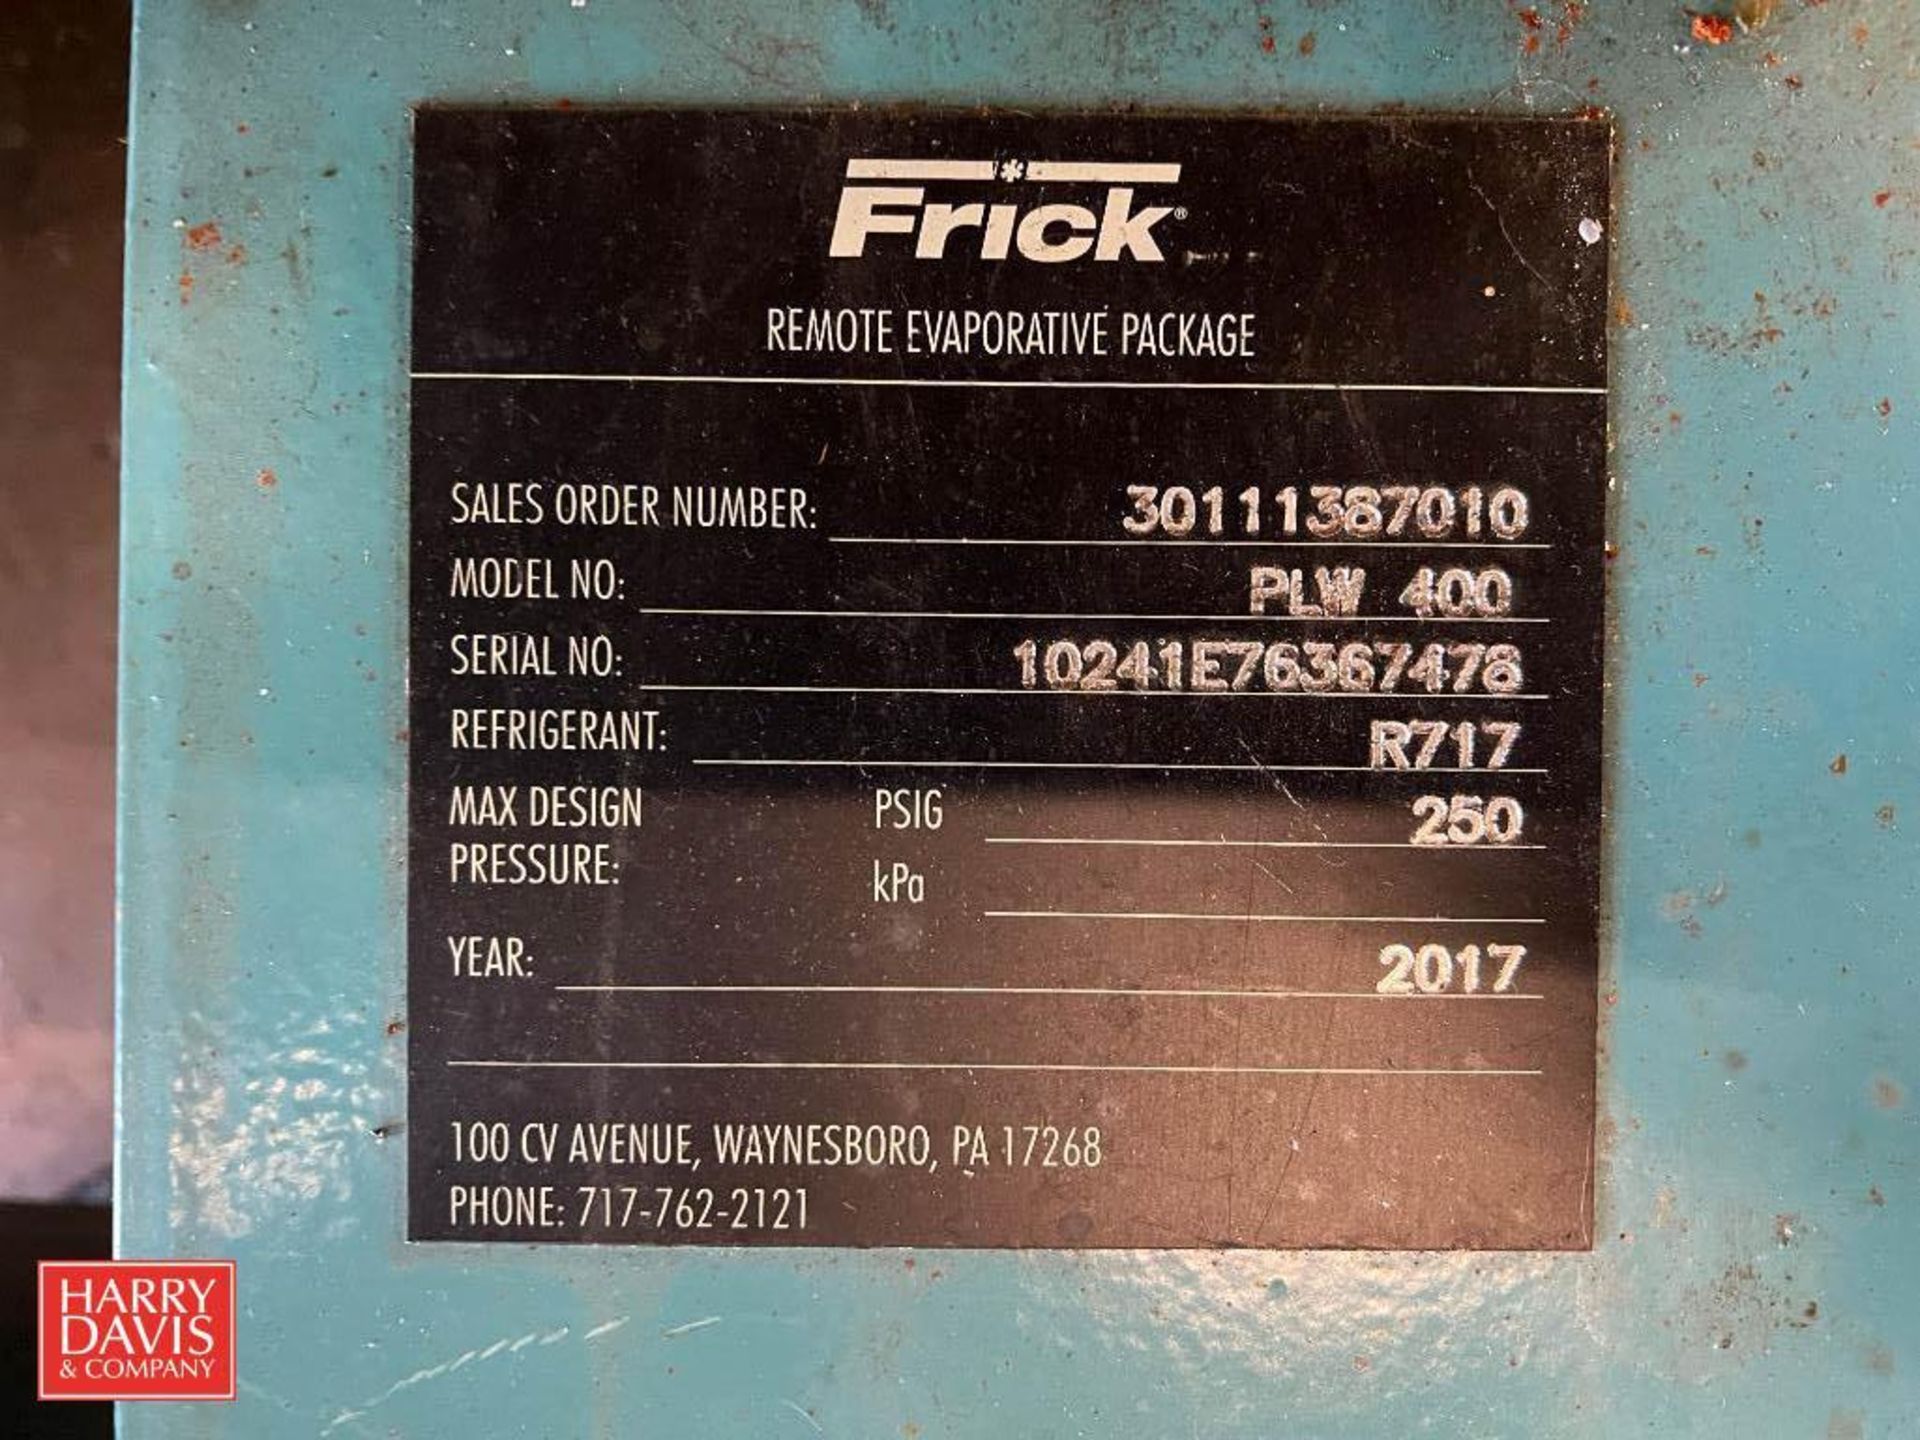 2017 Frick Remote Evaporative Package, Model: PLW 400, S/N: 10241E76367478 - Rigging Fee: $1750 - Image 2 of 3